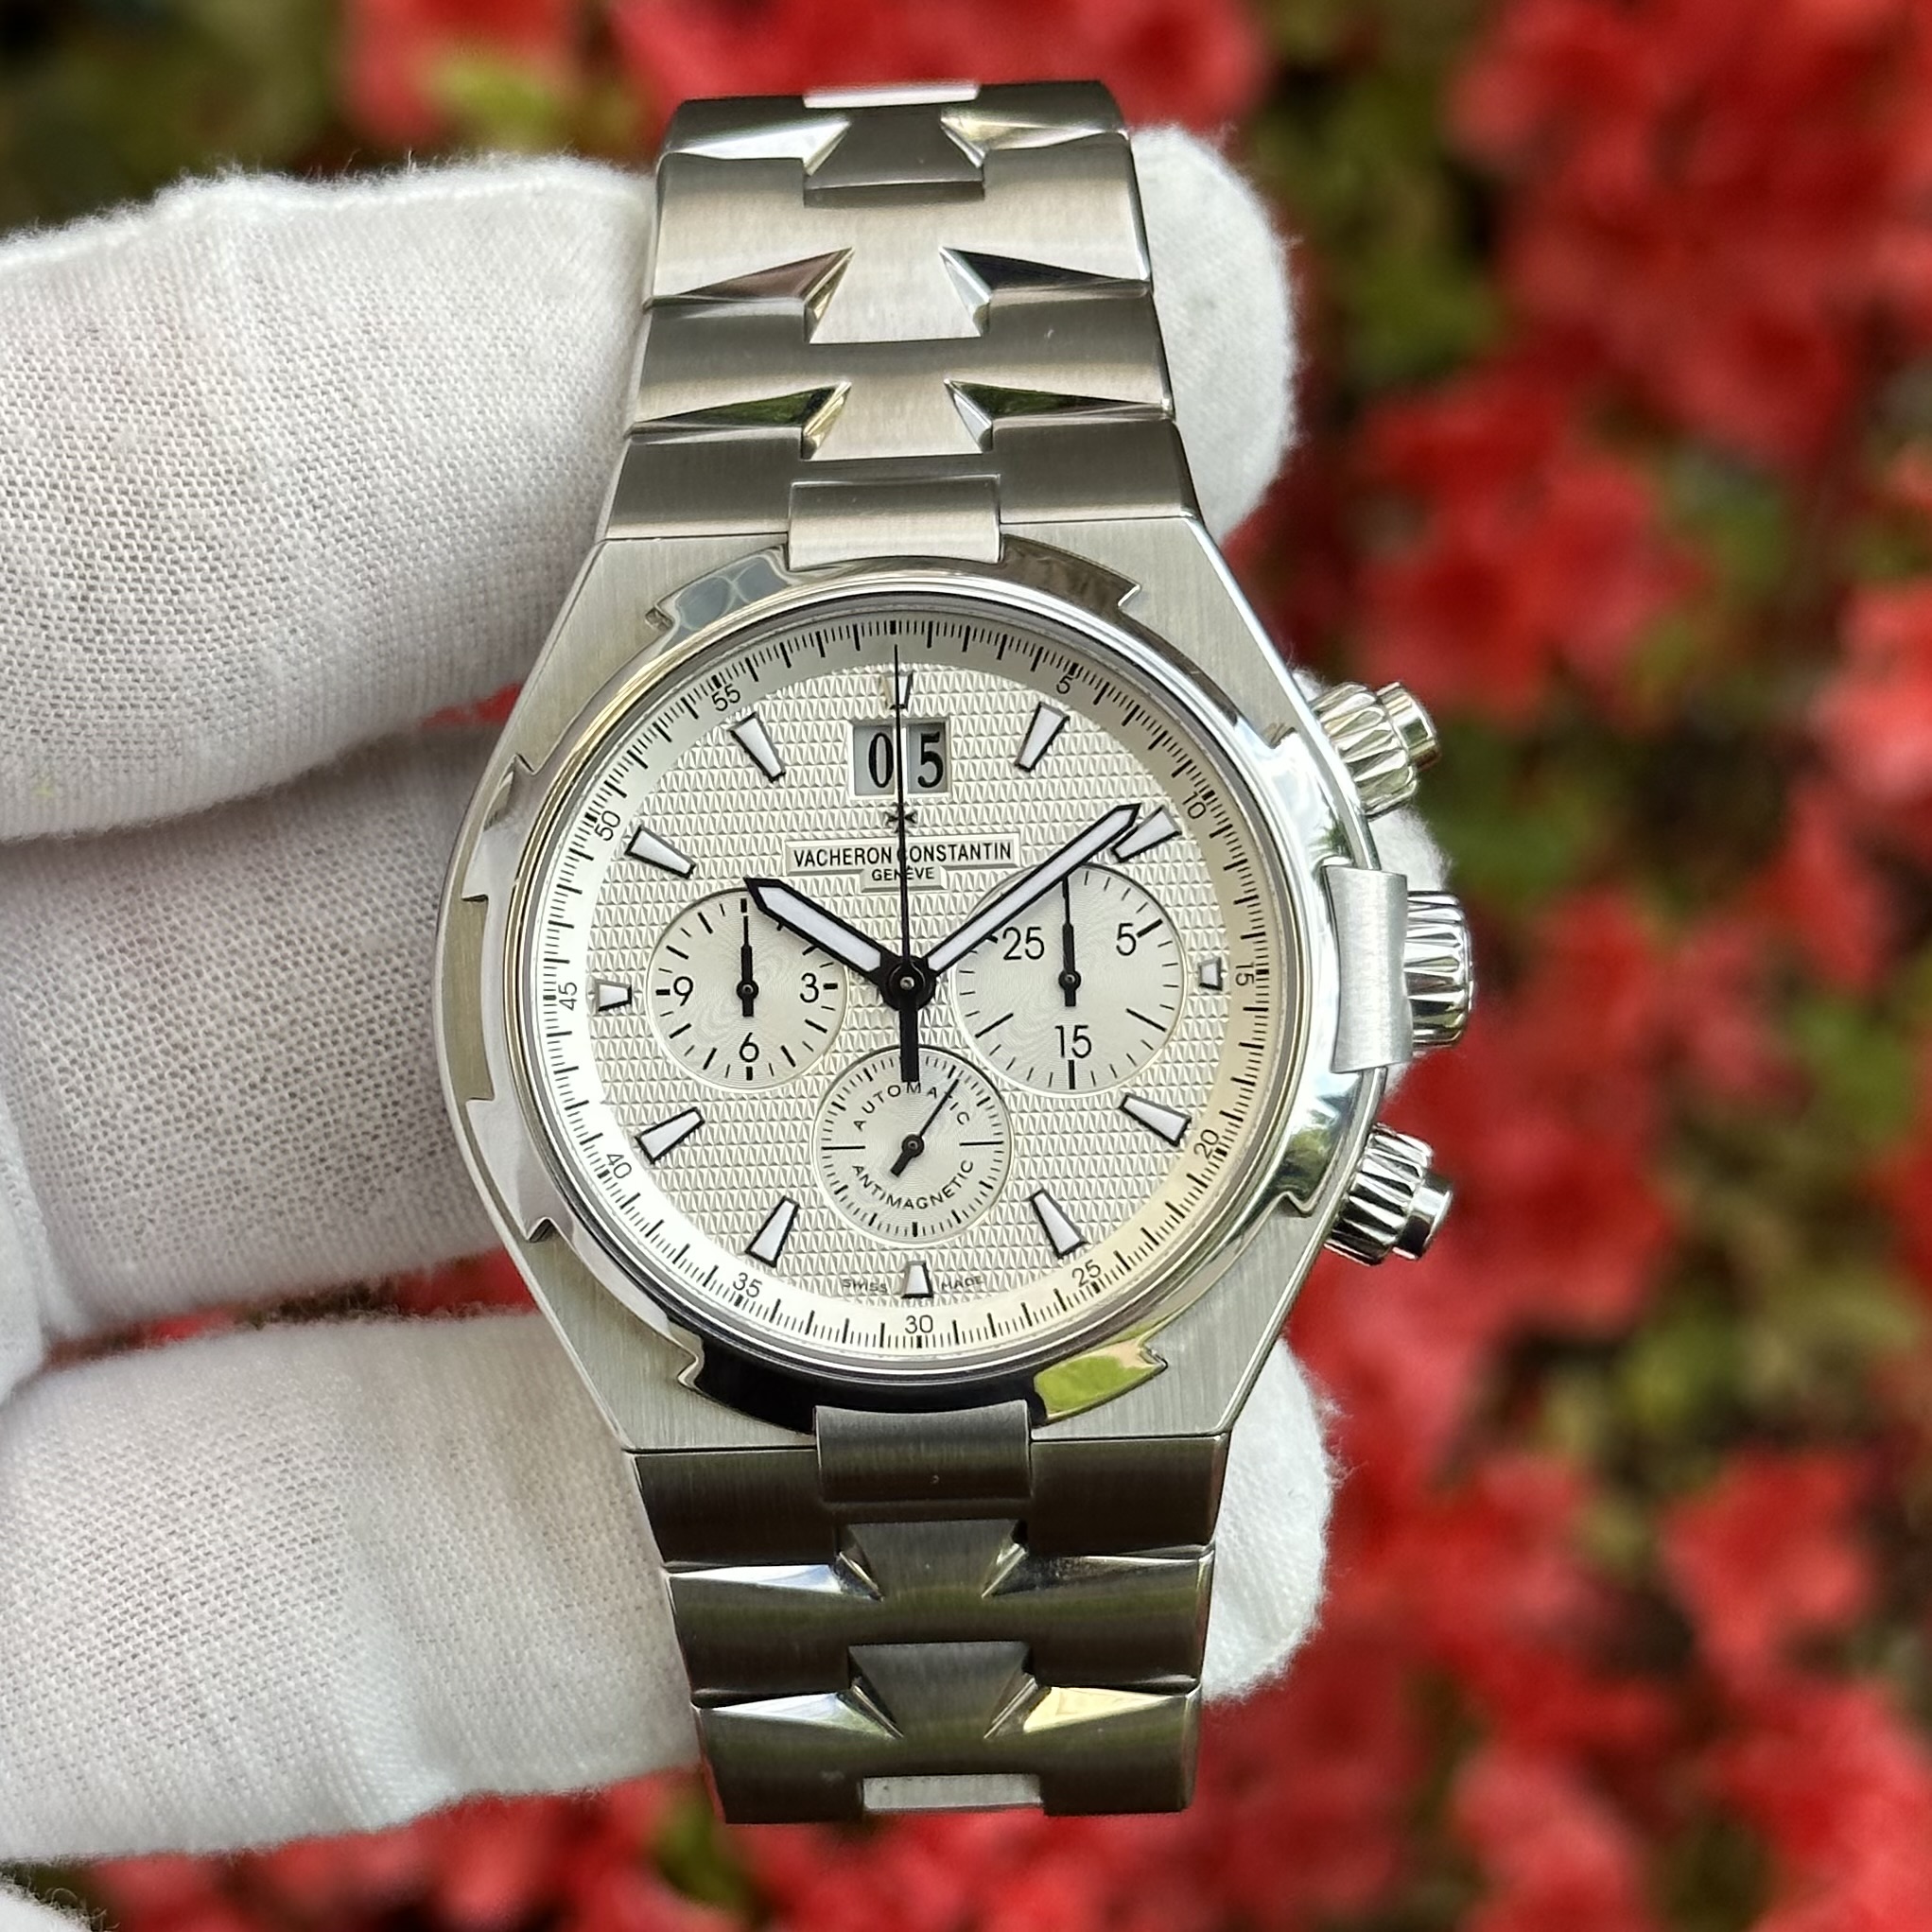 WTS] Vacheron Constantin Overseas Chronograph 49150 White Dial Box & Papers  Serviced! : r/Watchexchange